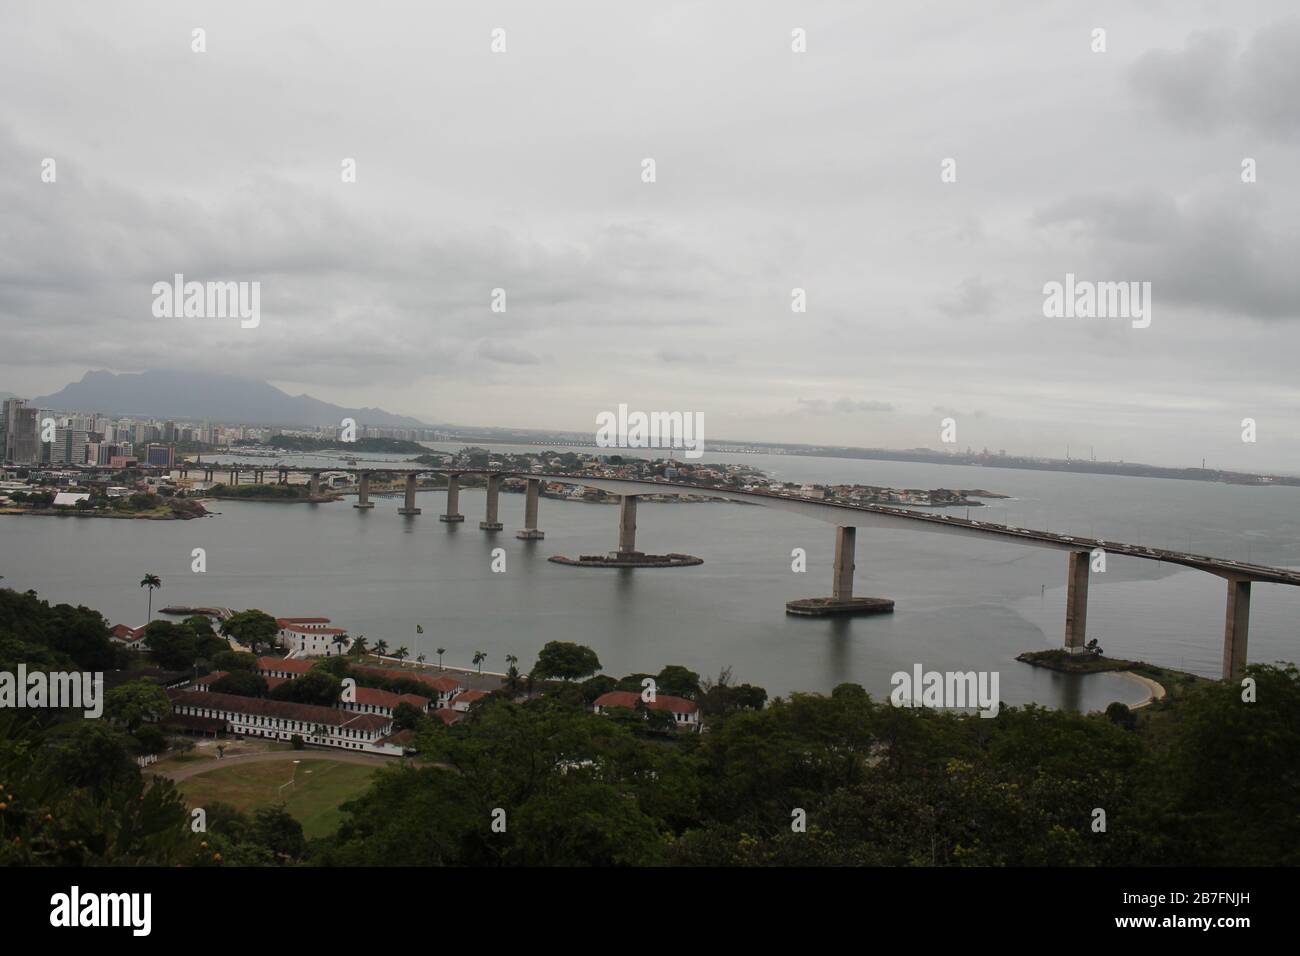 Aerial view of the city of Vitoria, Brazil Stock Photo